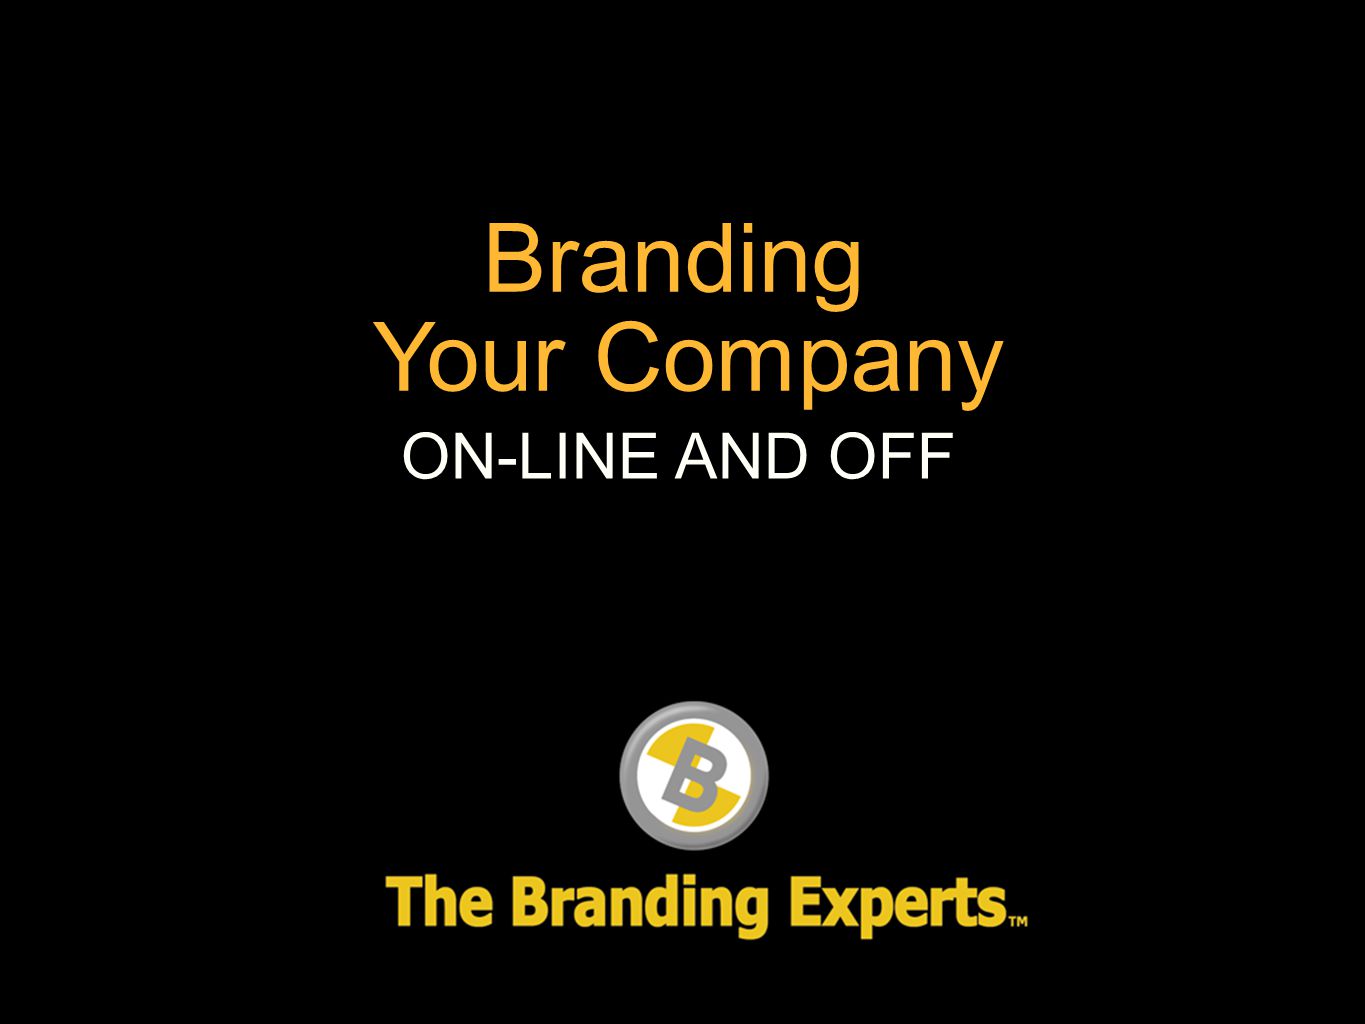 Branding Your Company ON-LINE AND OFF